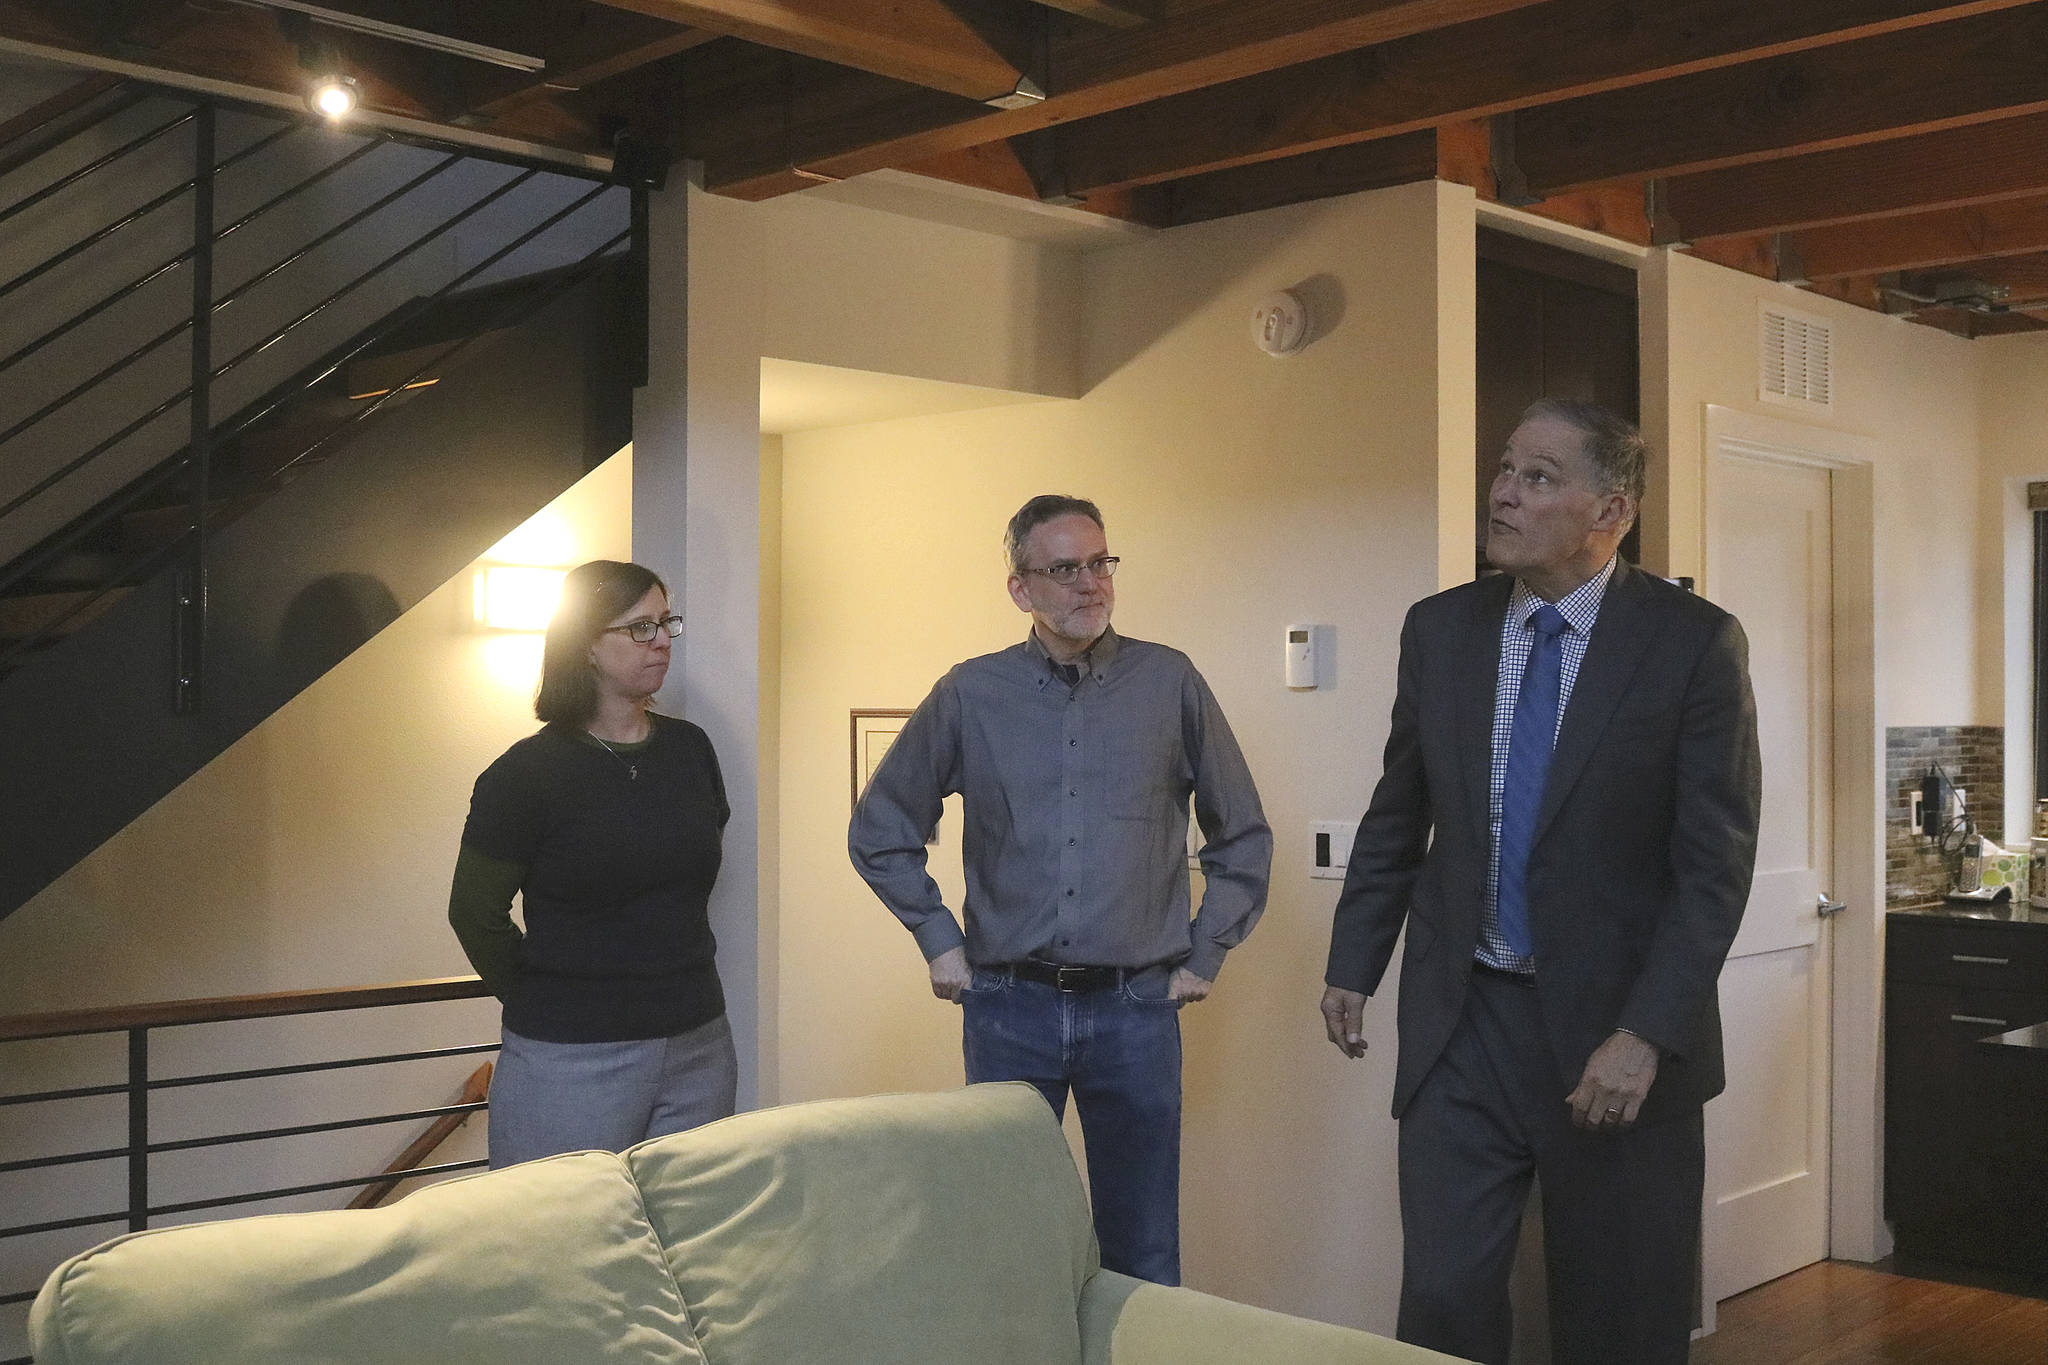 Inslee admires the energy-efficient home. Nicole Jennings/staff photo